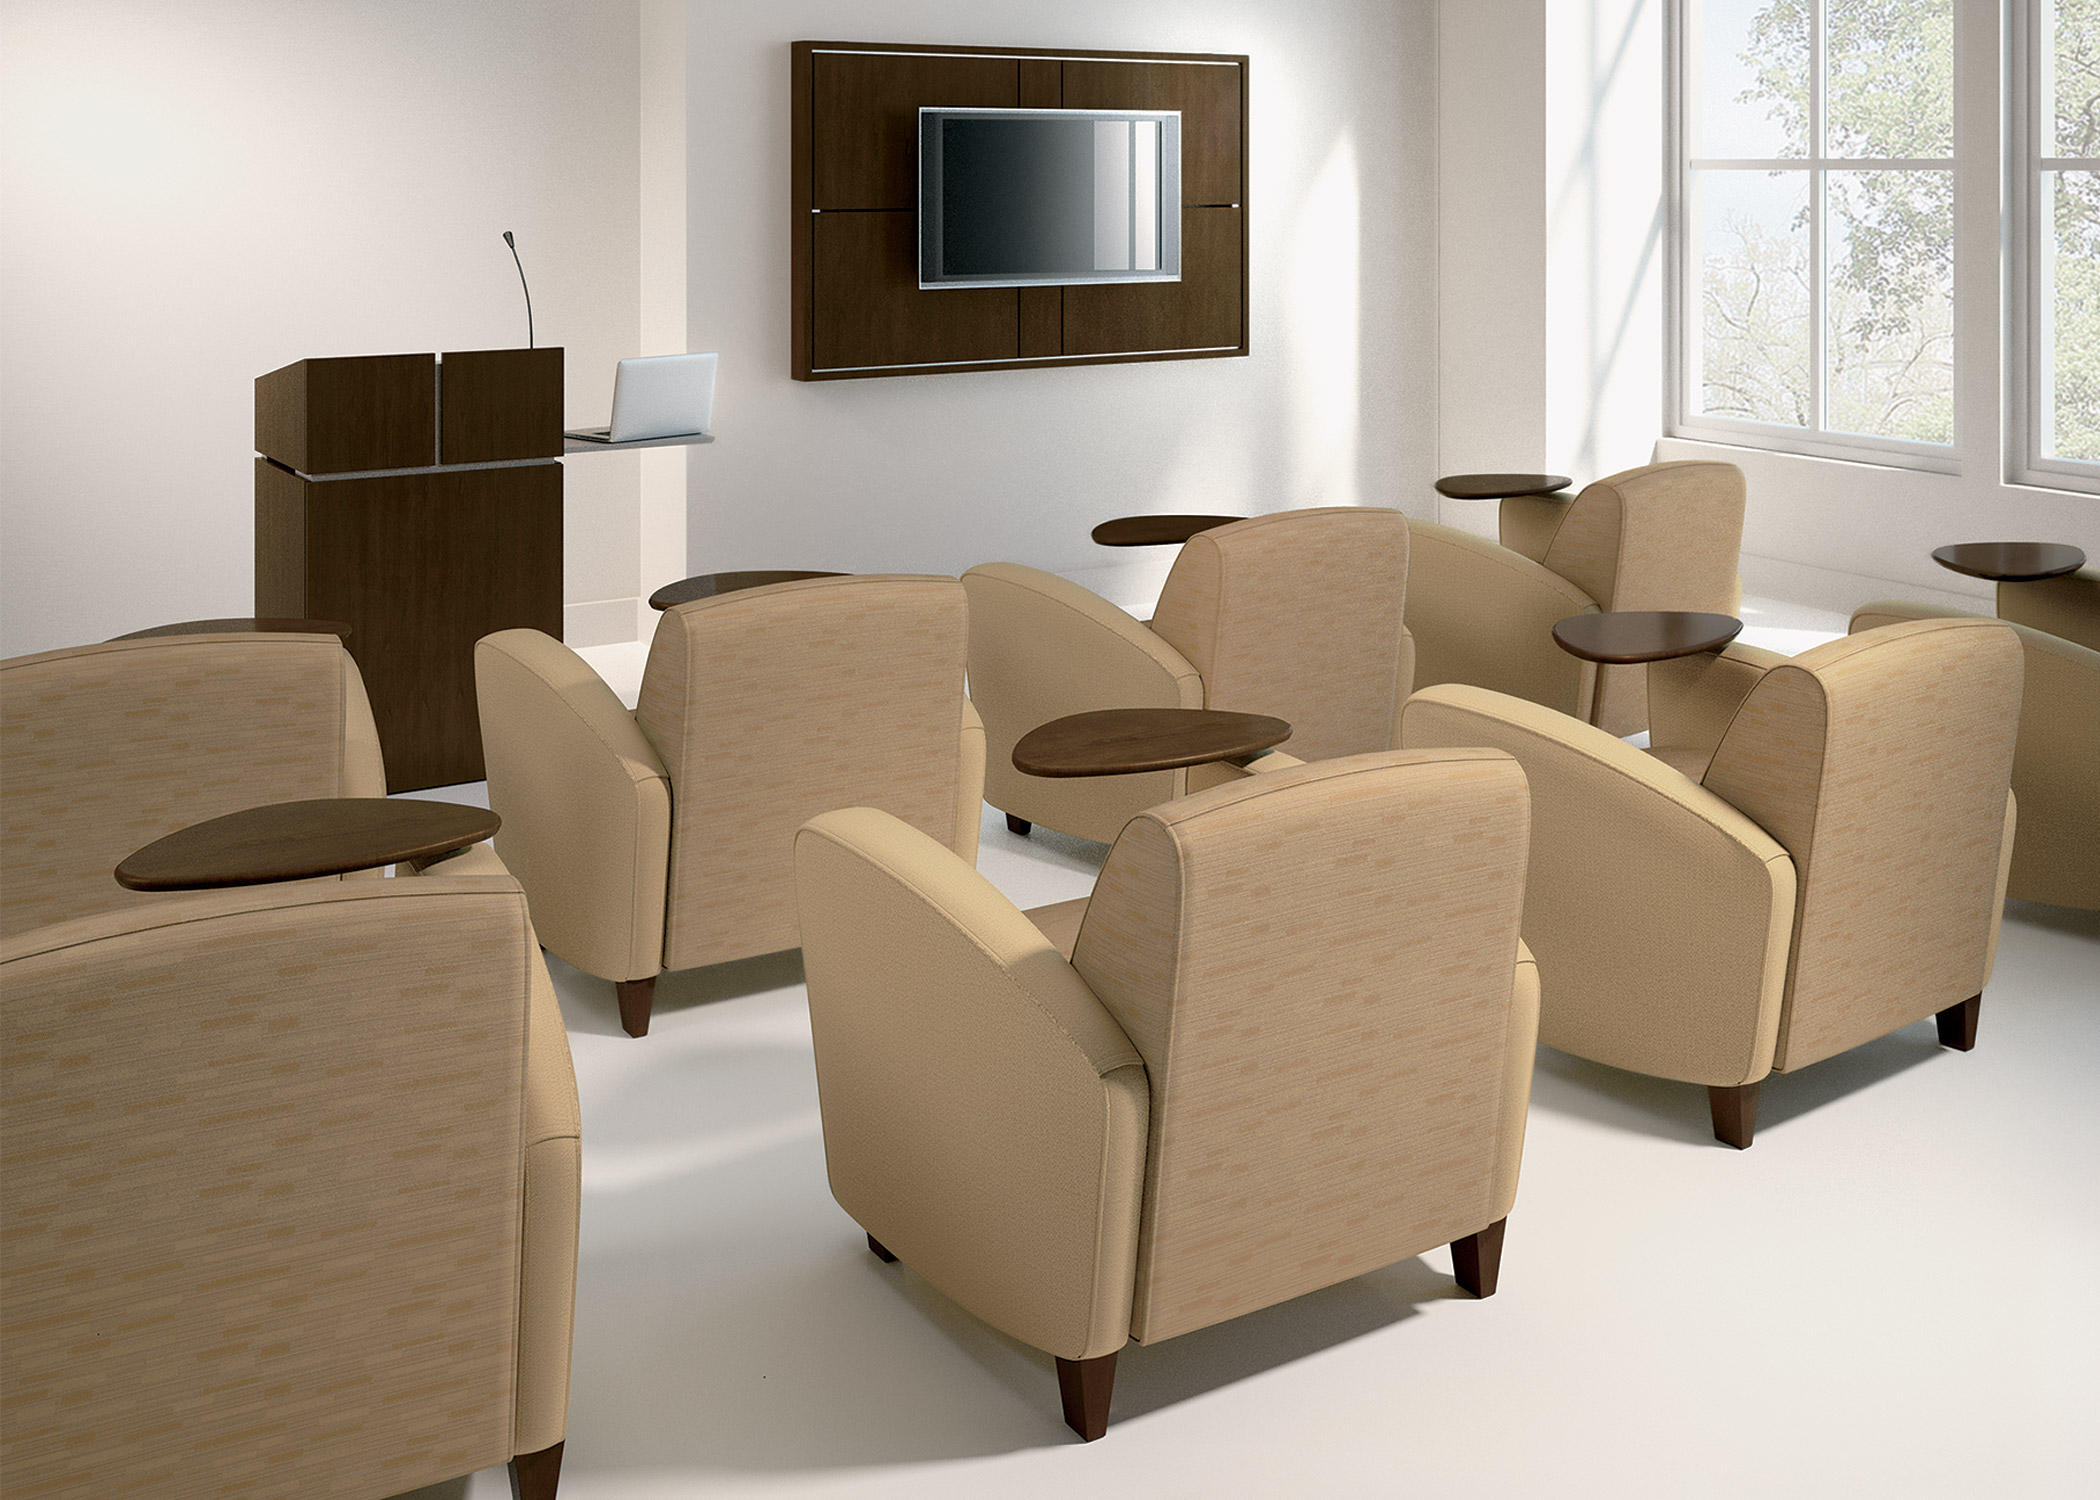 Reno Seating Sessel Von National Office Furniture Architonic